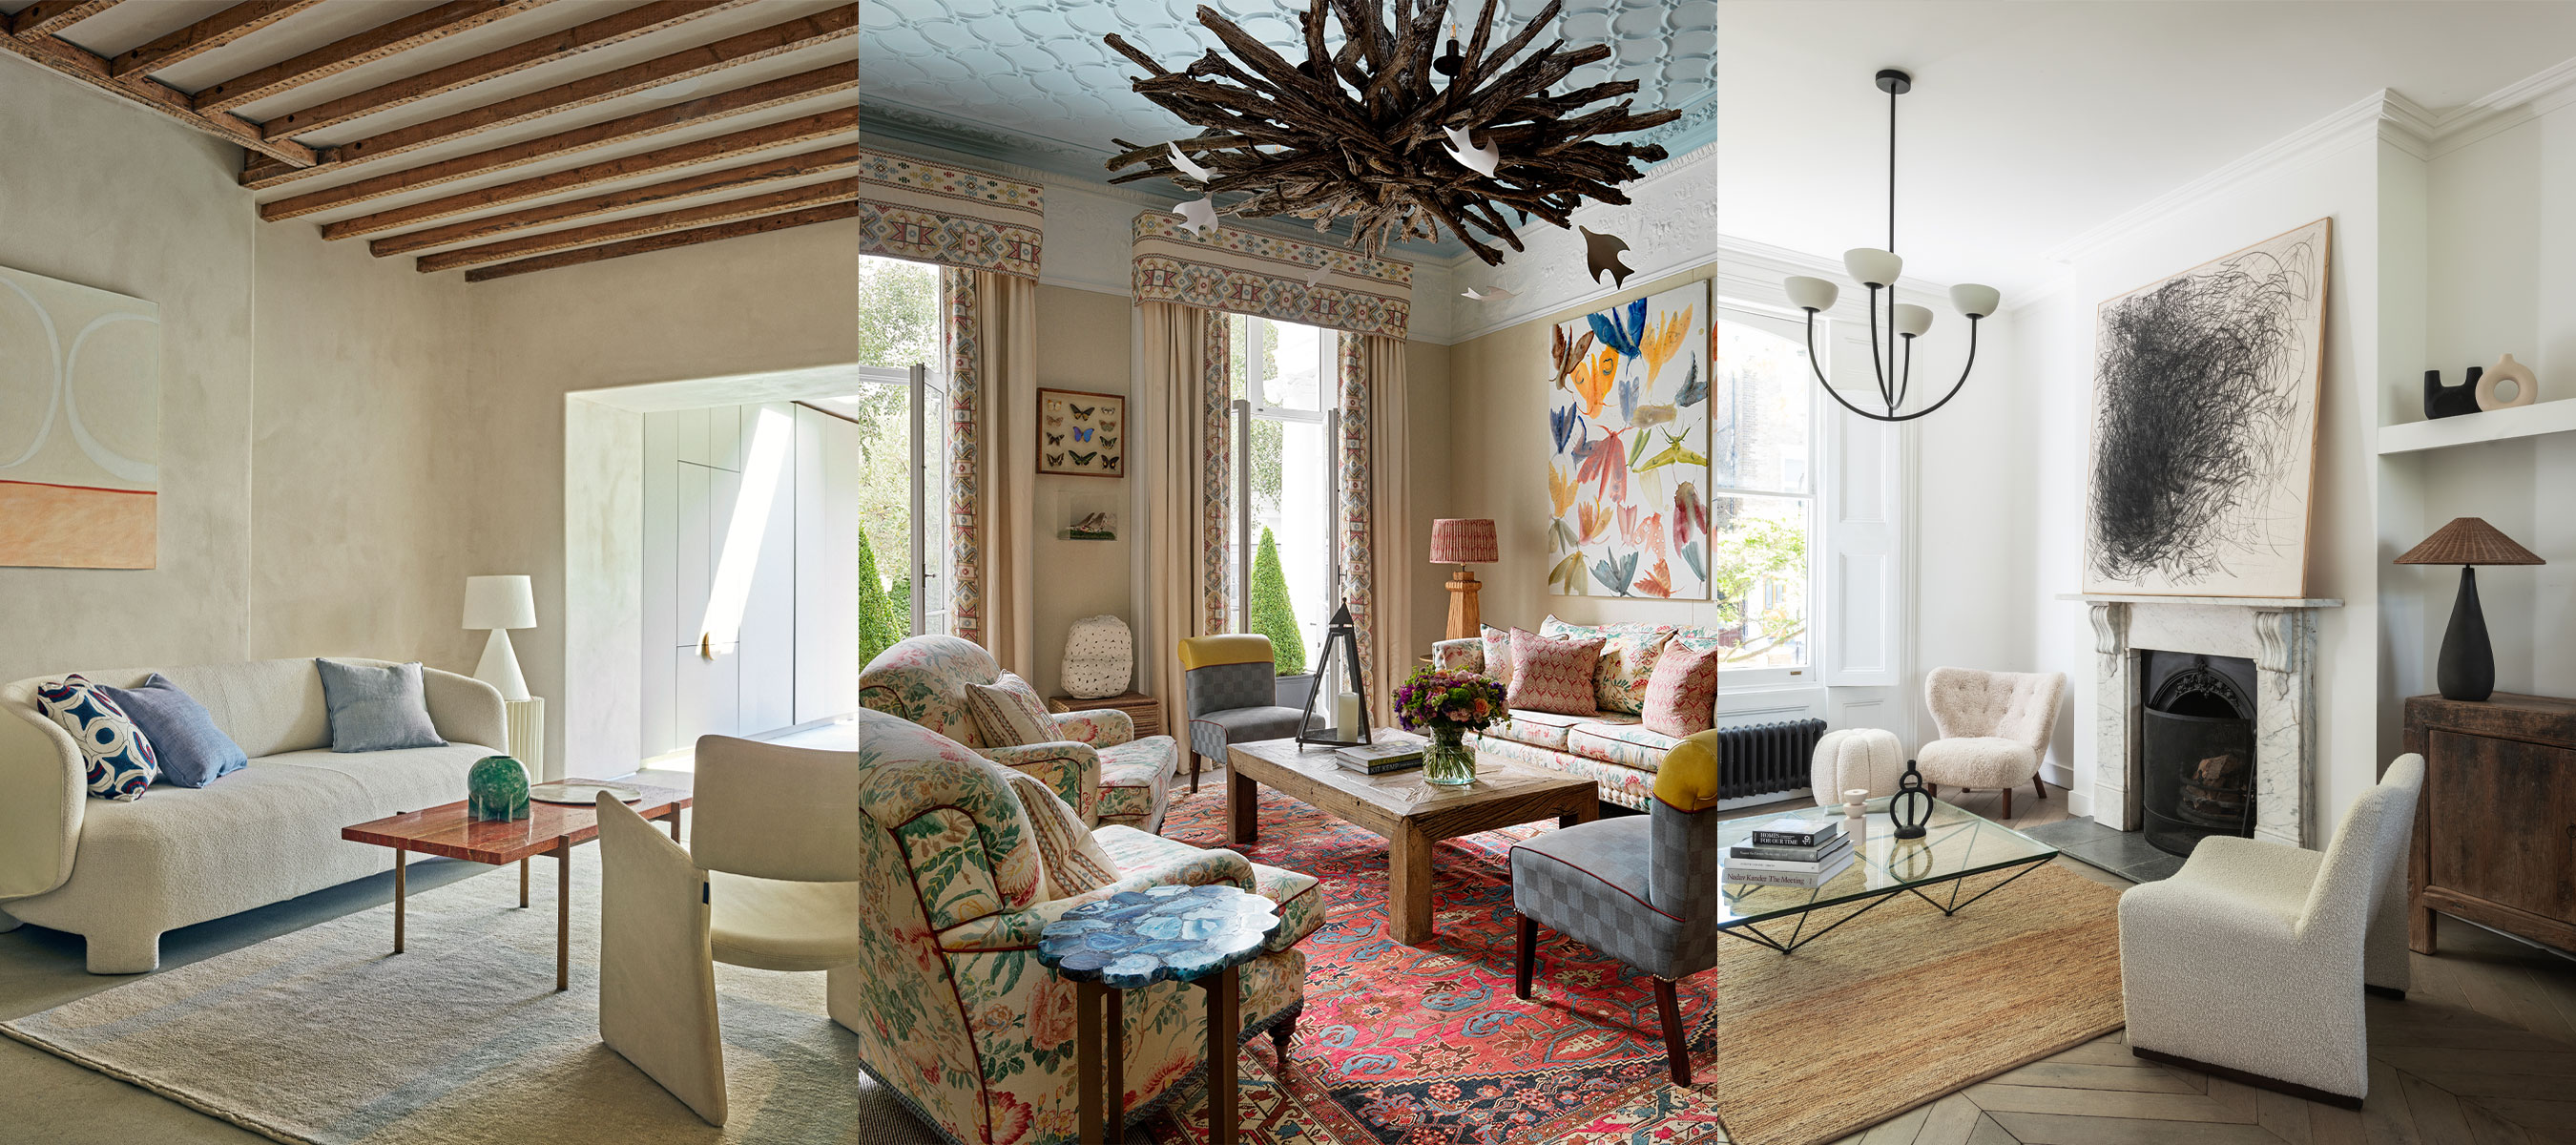 Living Room Ceiling Ideas: 12 Ideas That Celebrate The Ceiling |